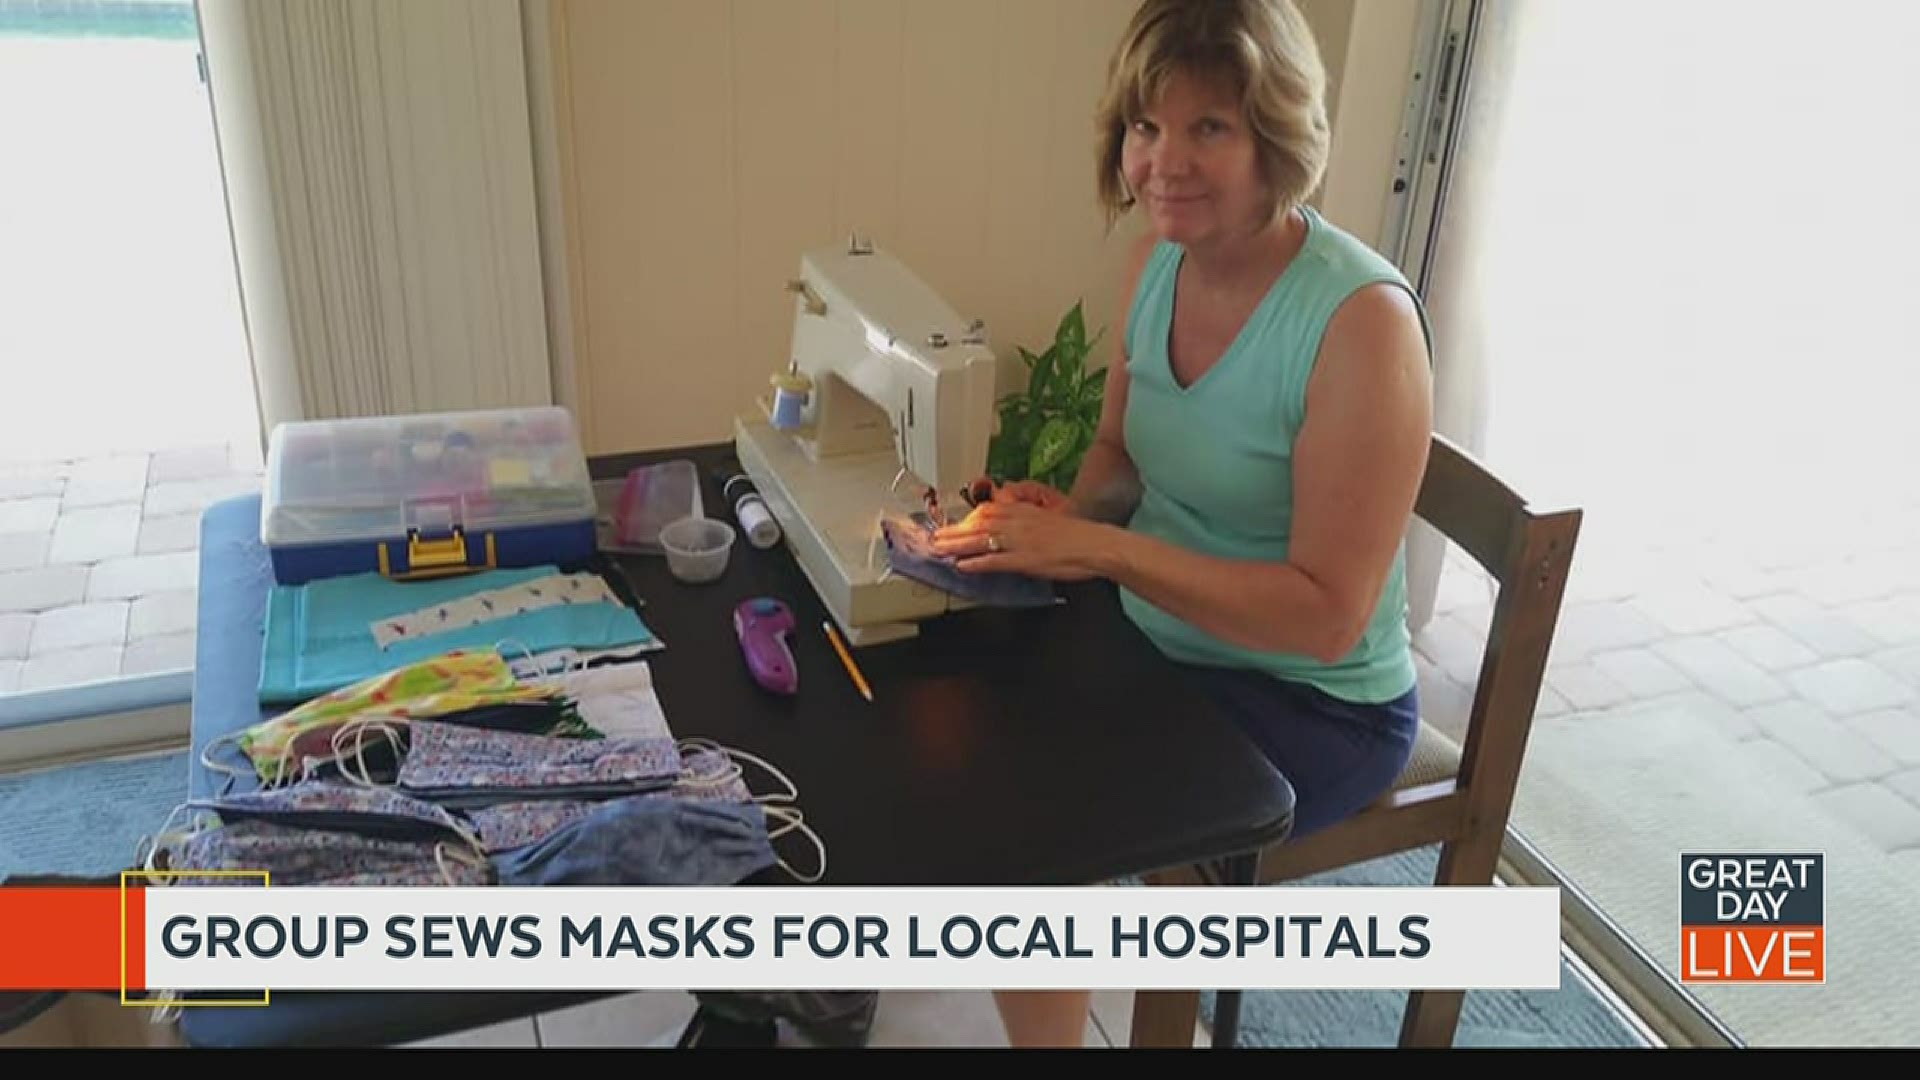 If you would like to donate materials, help sew, or even cut elastic and patterns, find the group on Facebook at "Sewing for St. Pete - COVID 19 masks."